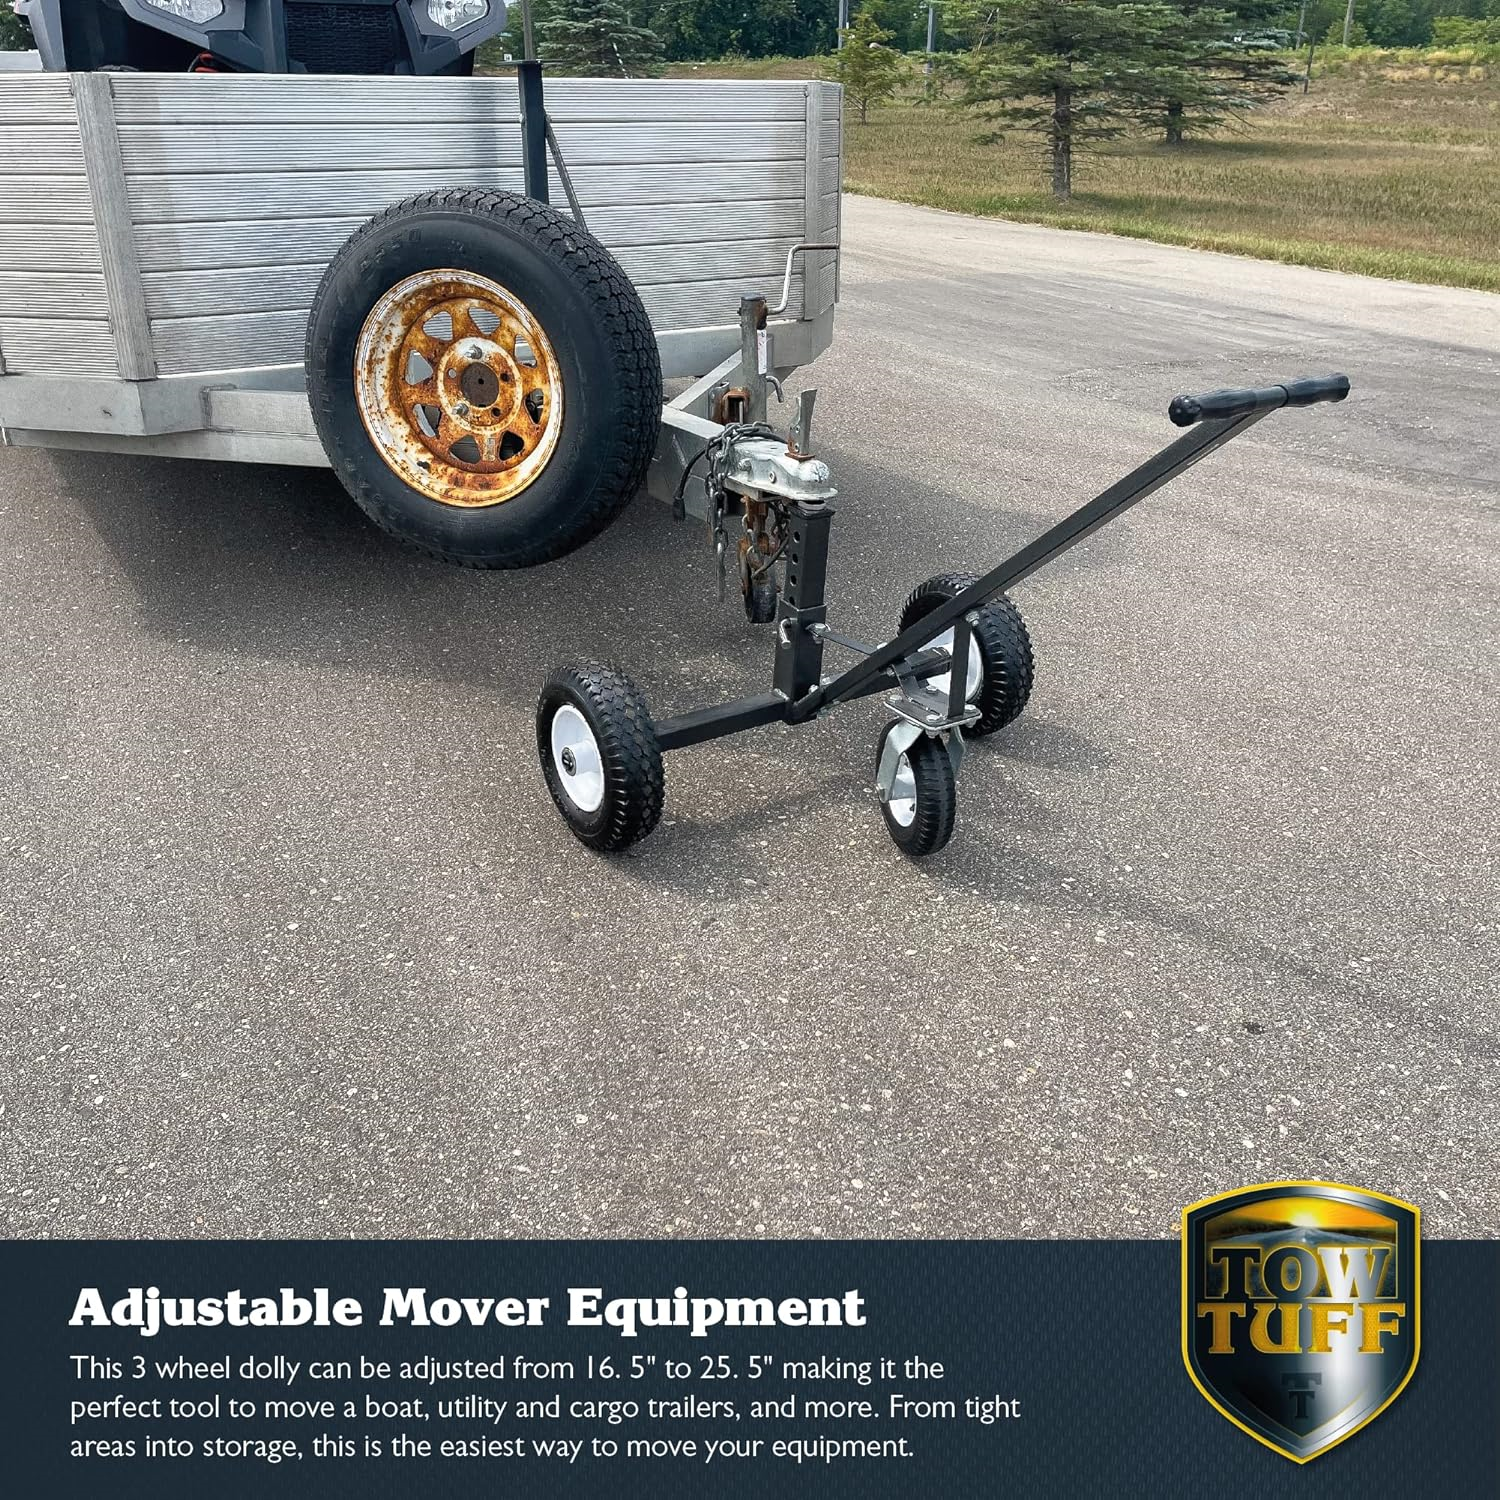 Tow Tuff, Tow Tuff TMD-800C Trailer Dolly Standard Adjustable 16.5" to 25.5" Max Weight 800lbs Works with 1 7/8" Coupler or Larger New